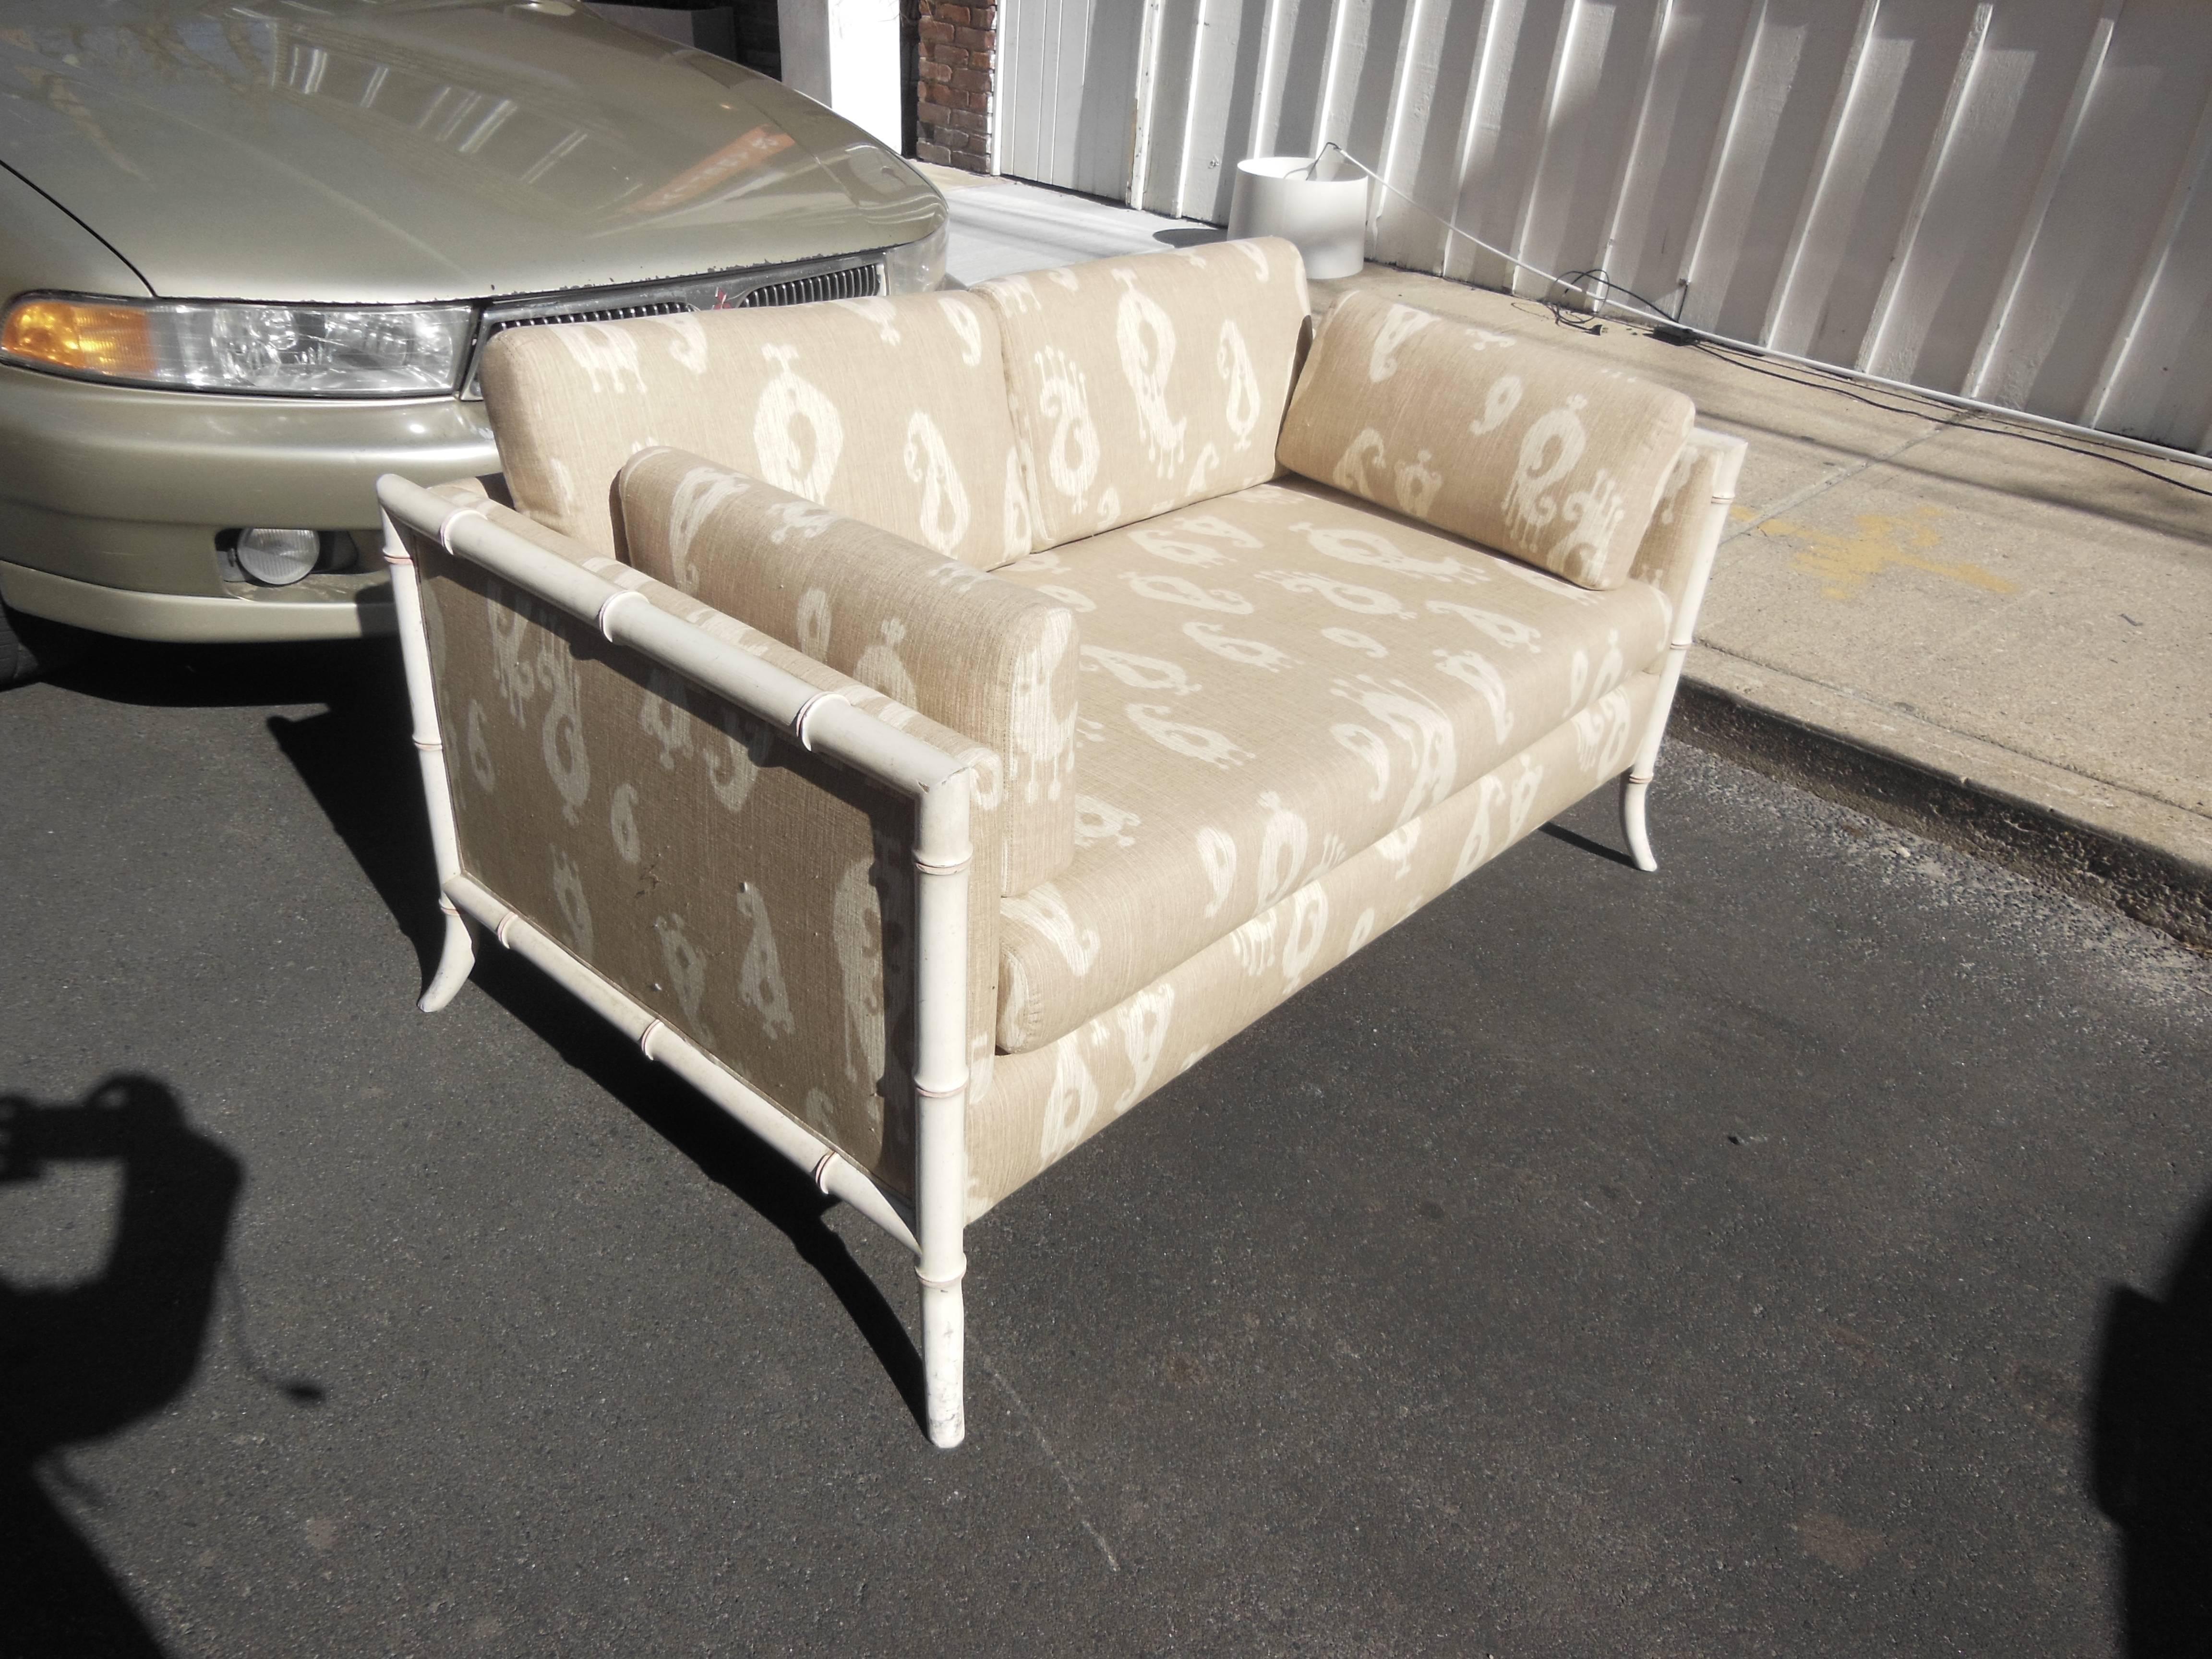 A vintage 1960s settee newly redone in cotton Ikat upholstery.